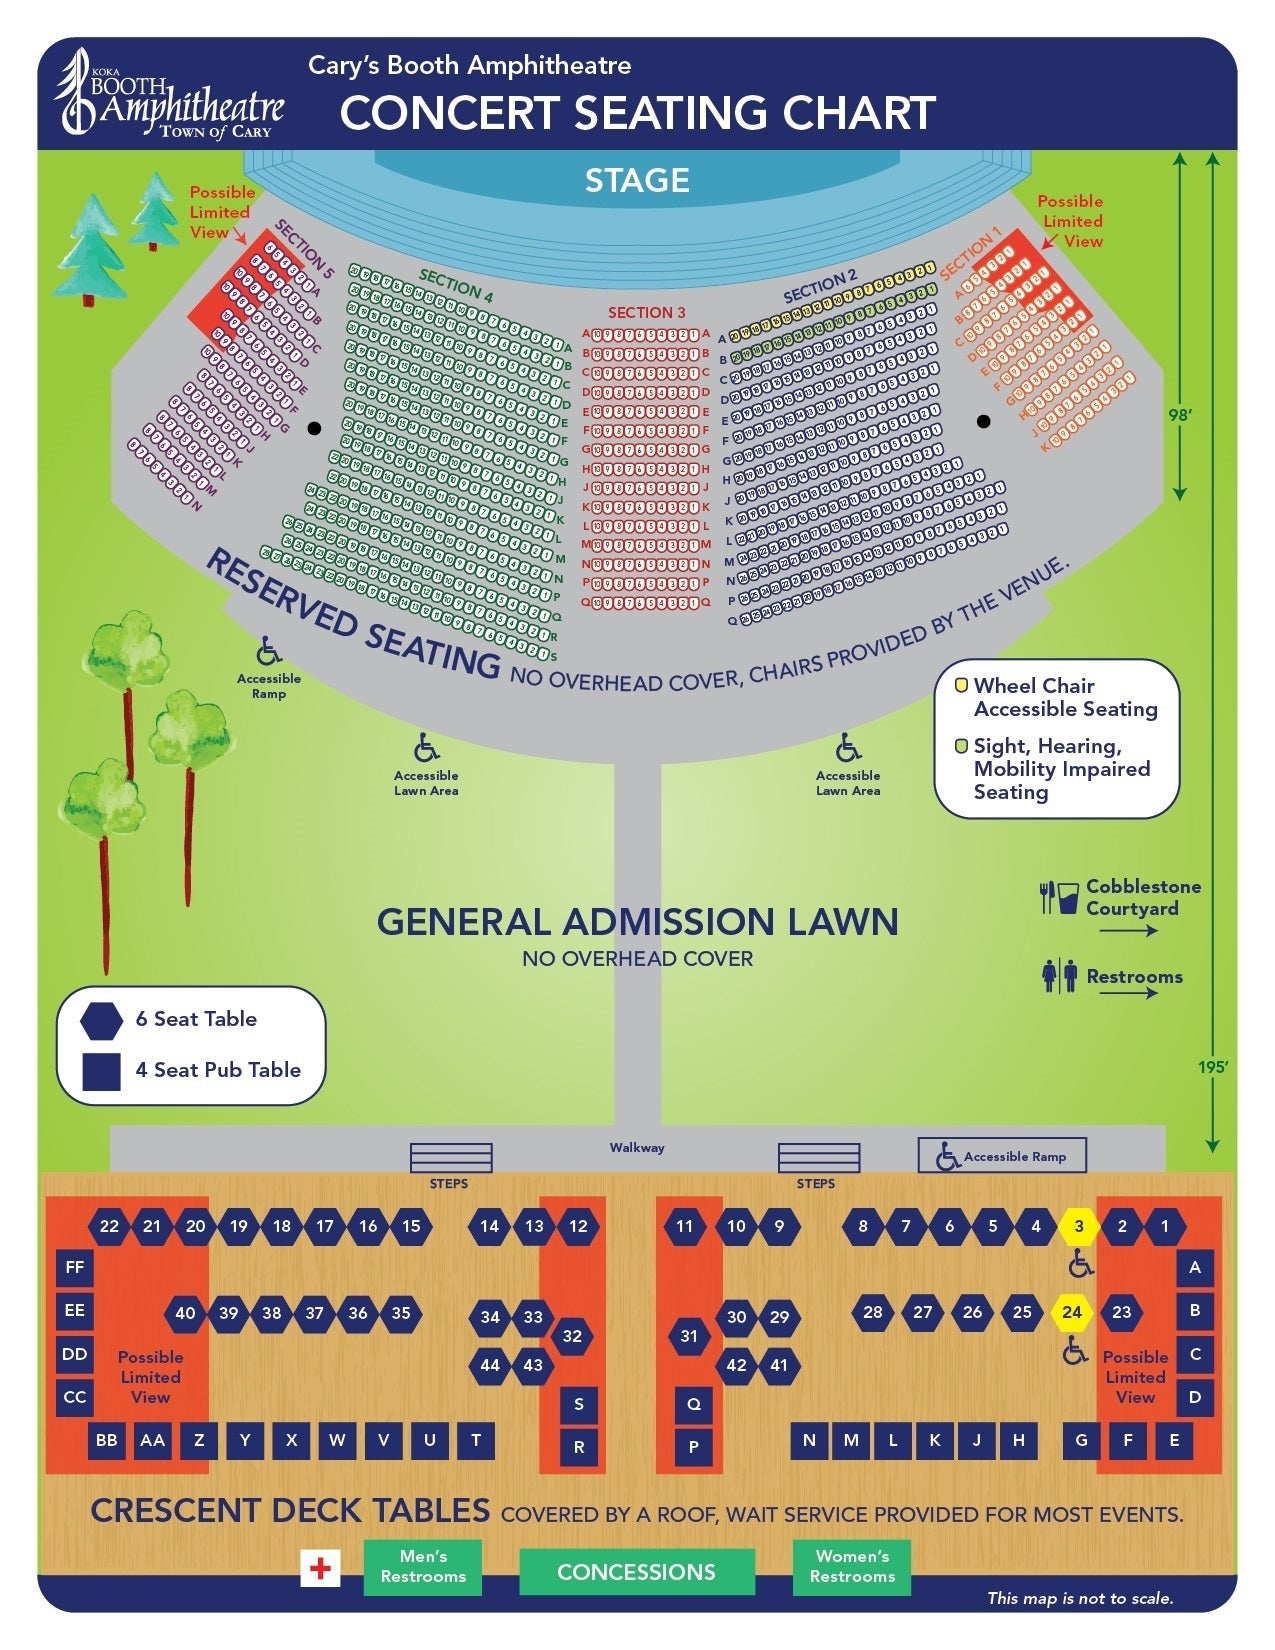 Seating Charts | Booth Amphitheatre